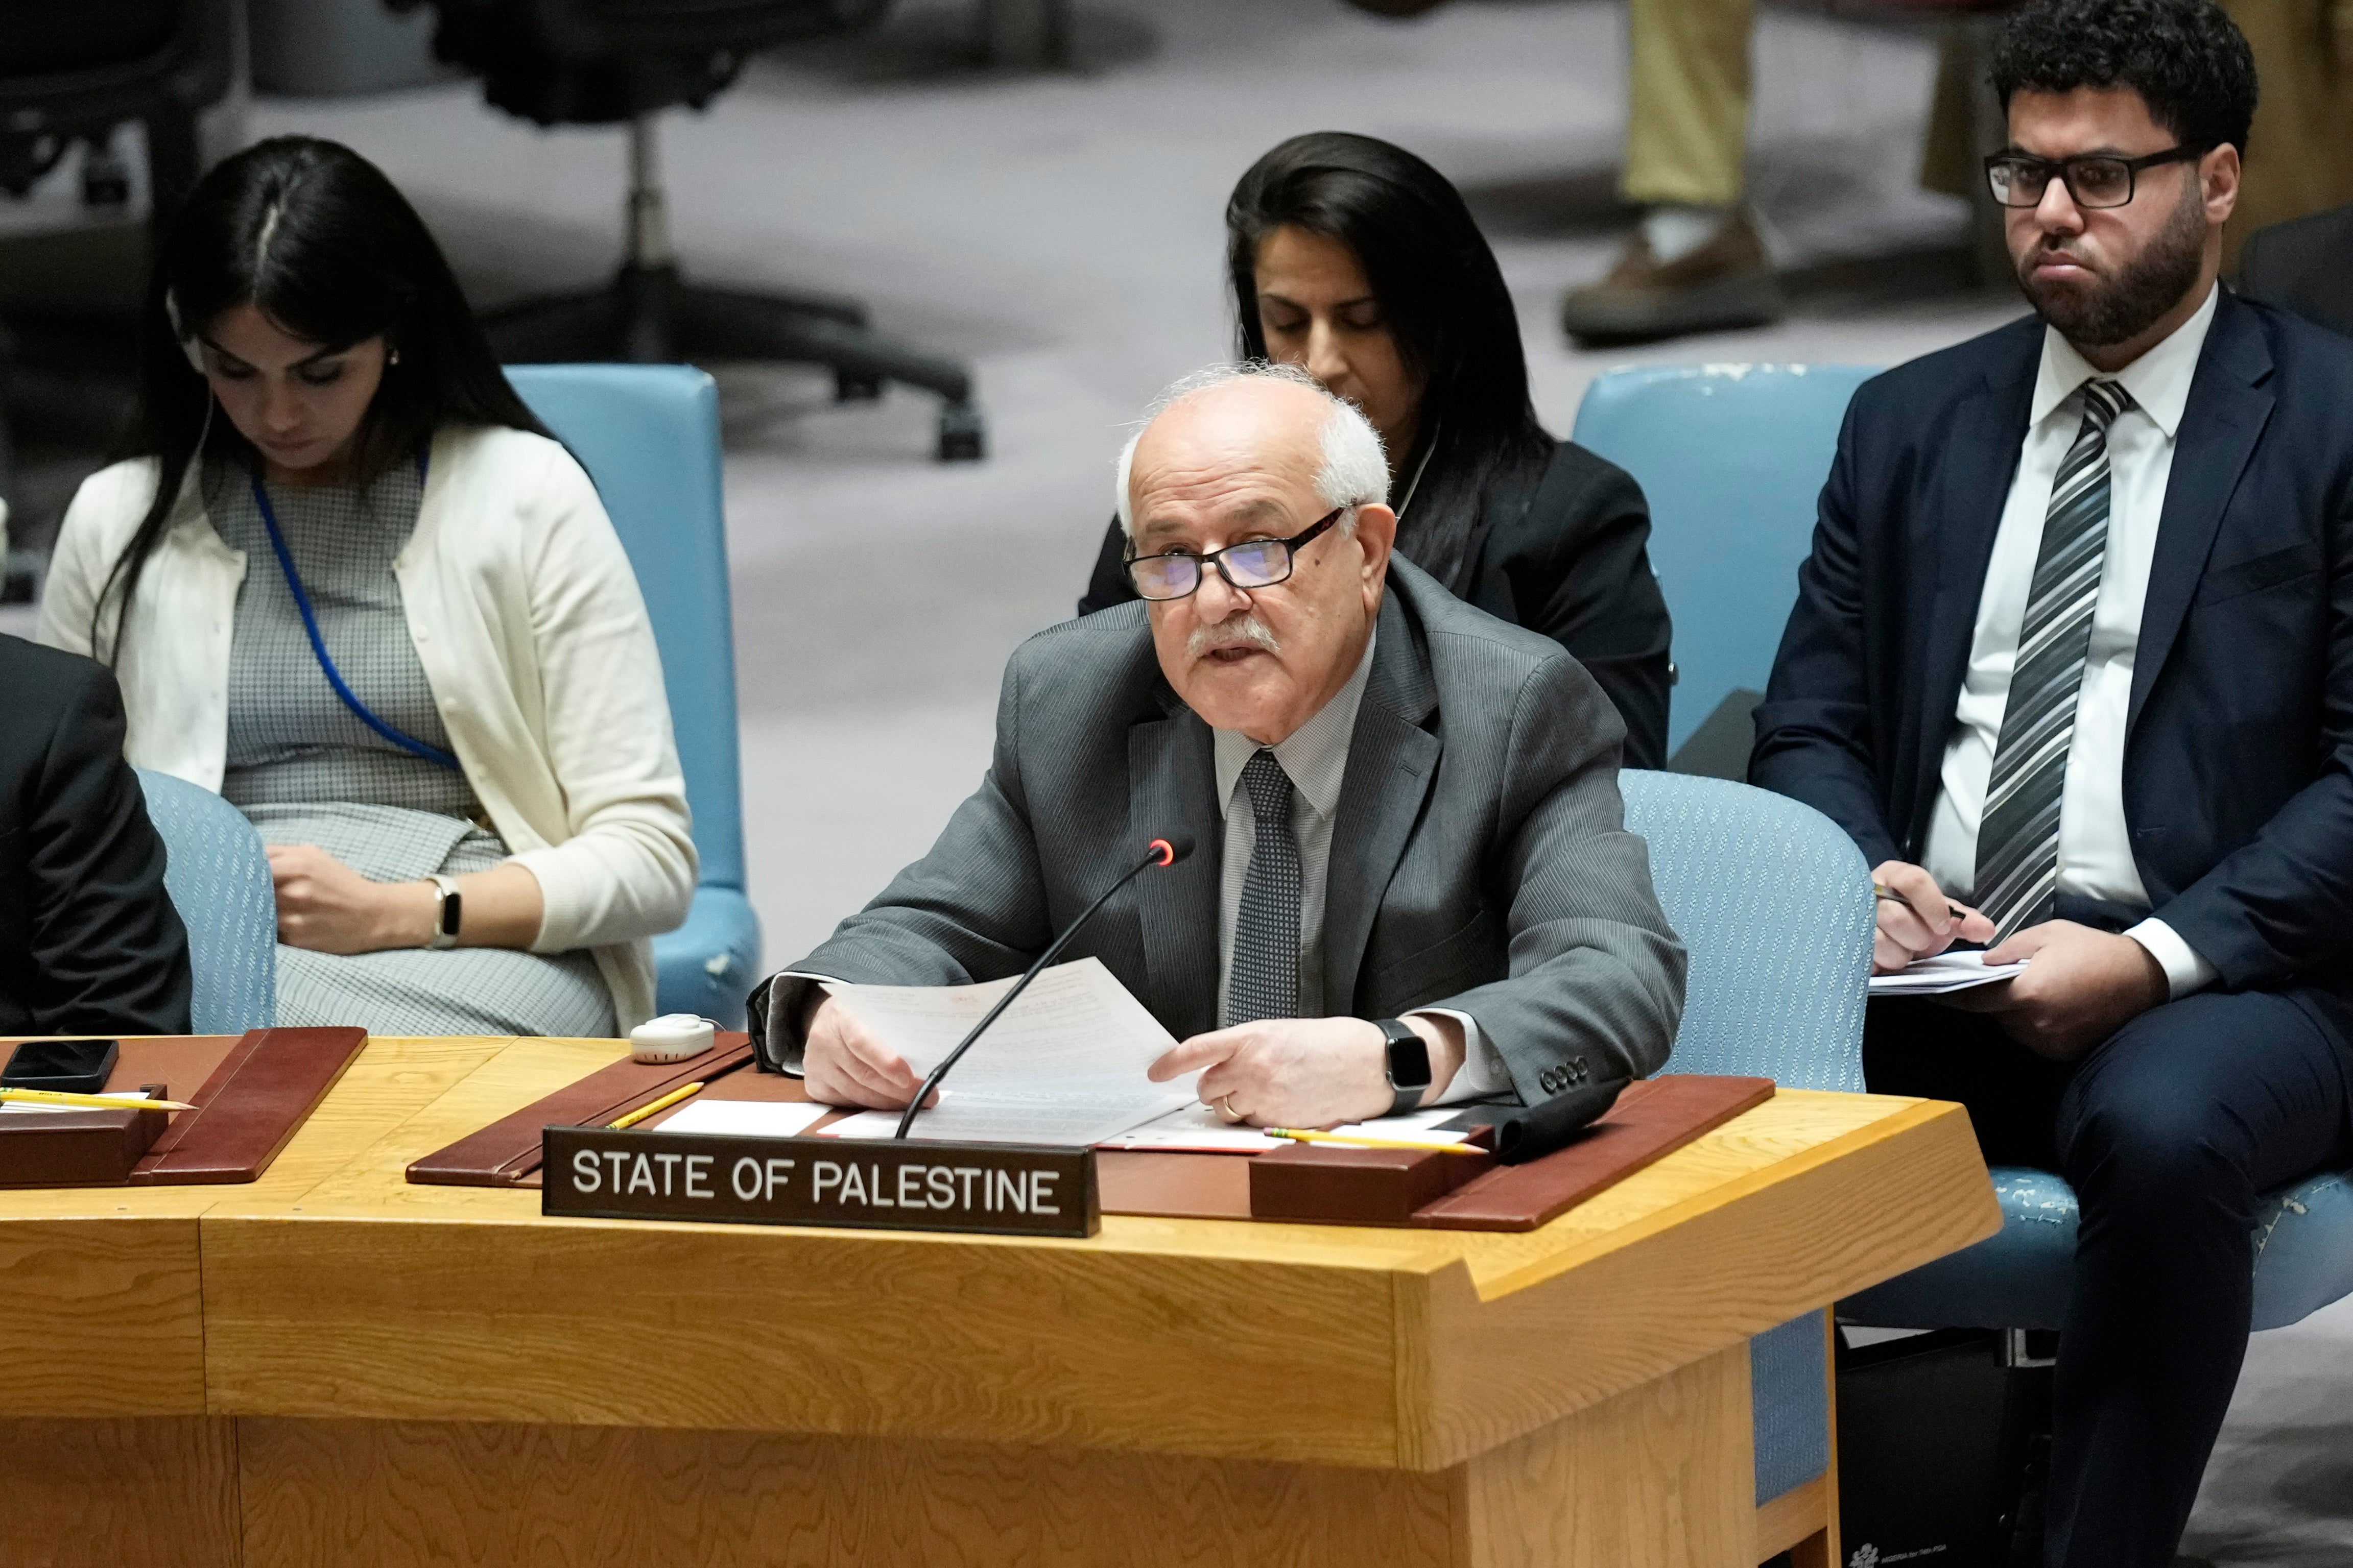 Out of 193 UN member states, more than 140 recognise the state of Palestine